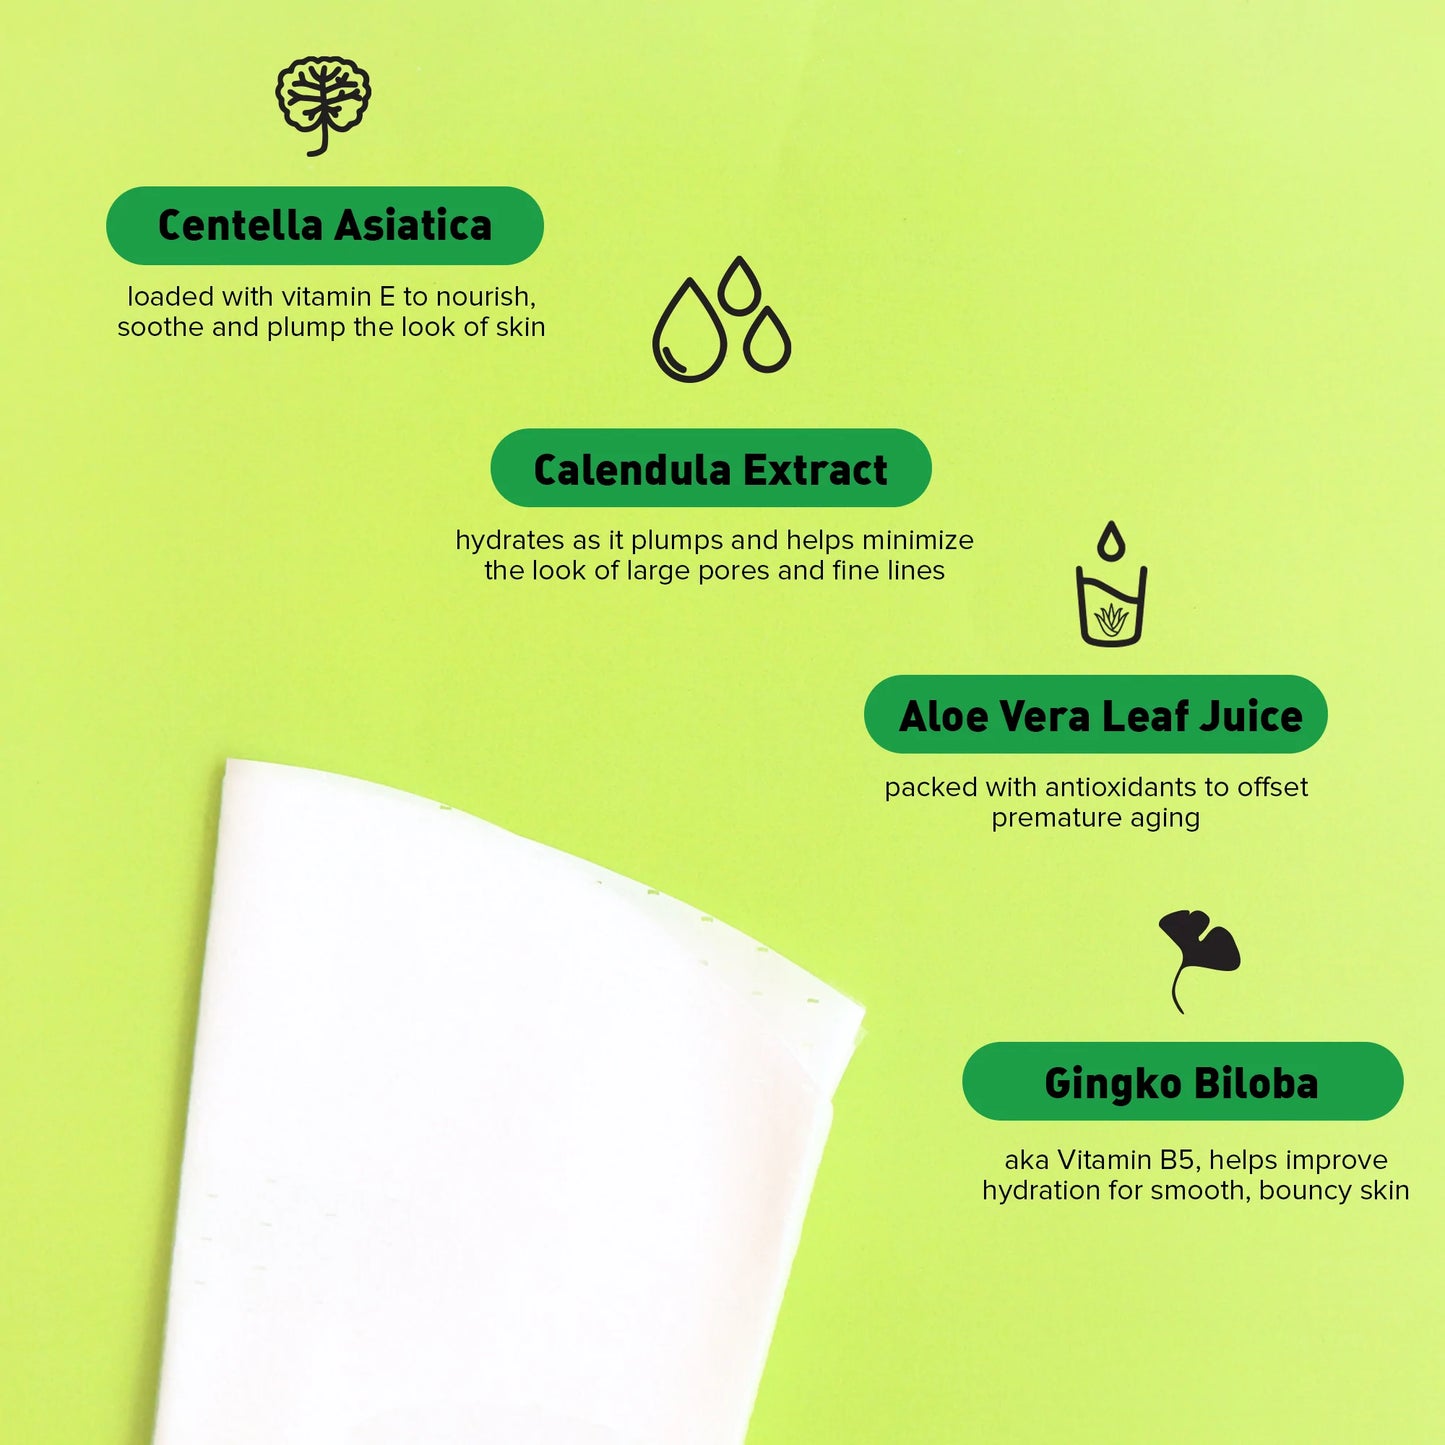 image of icons for the ingredients such as centella asiatica, calendula extract, aloe vera leaf juice, and gingko biloba